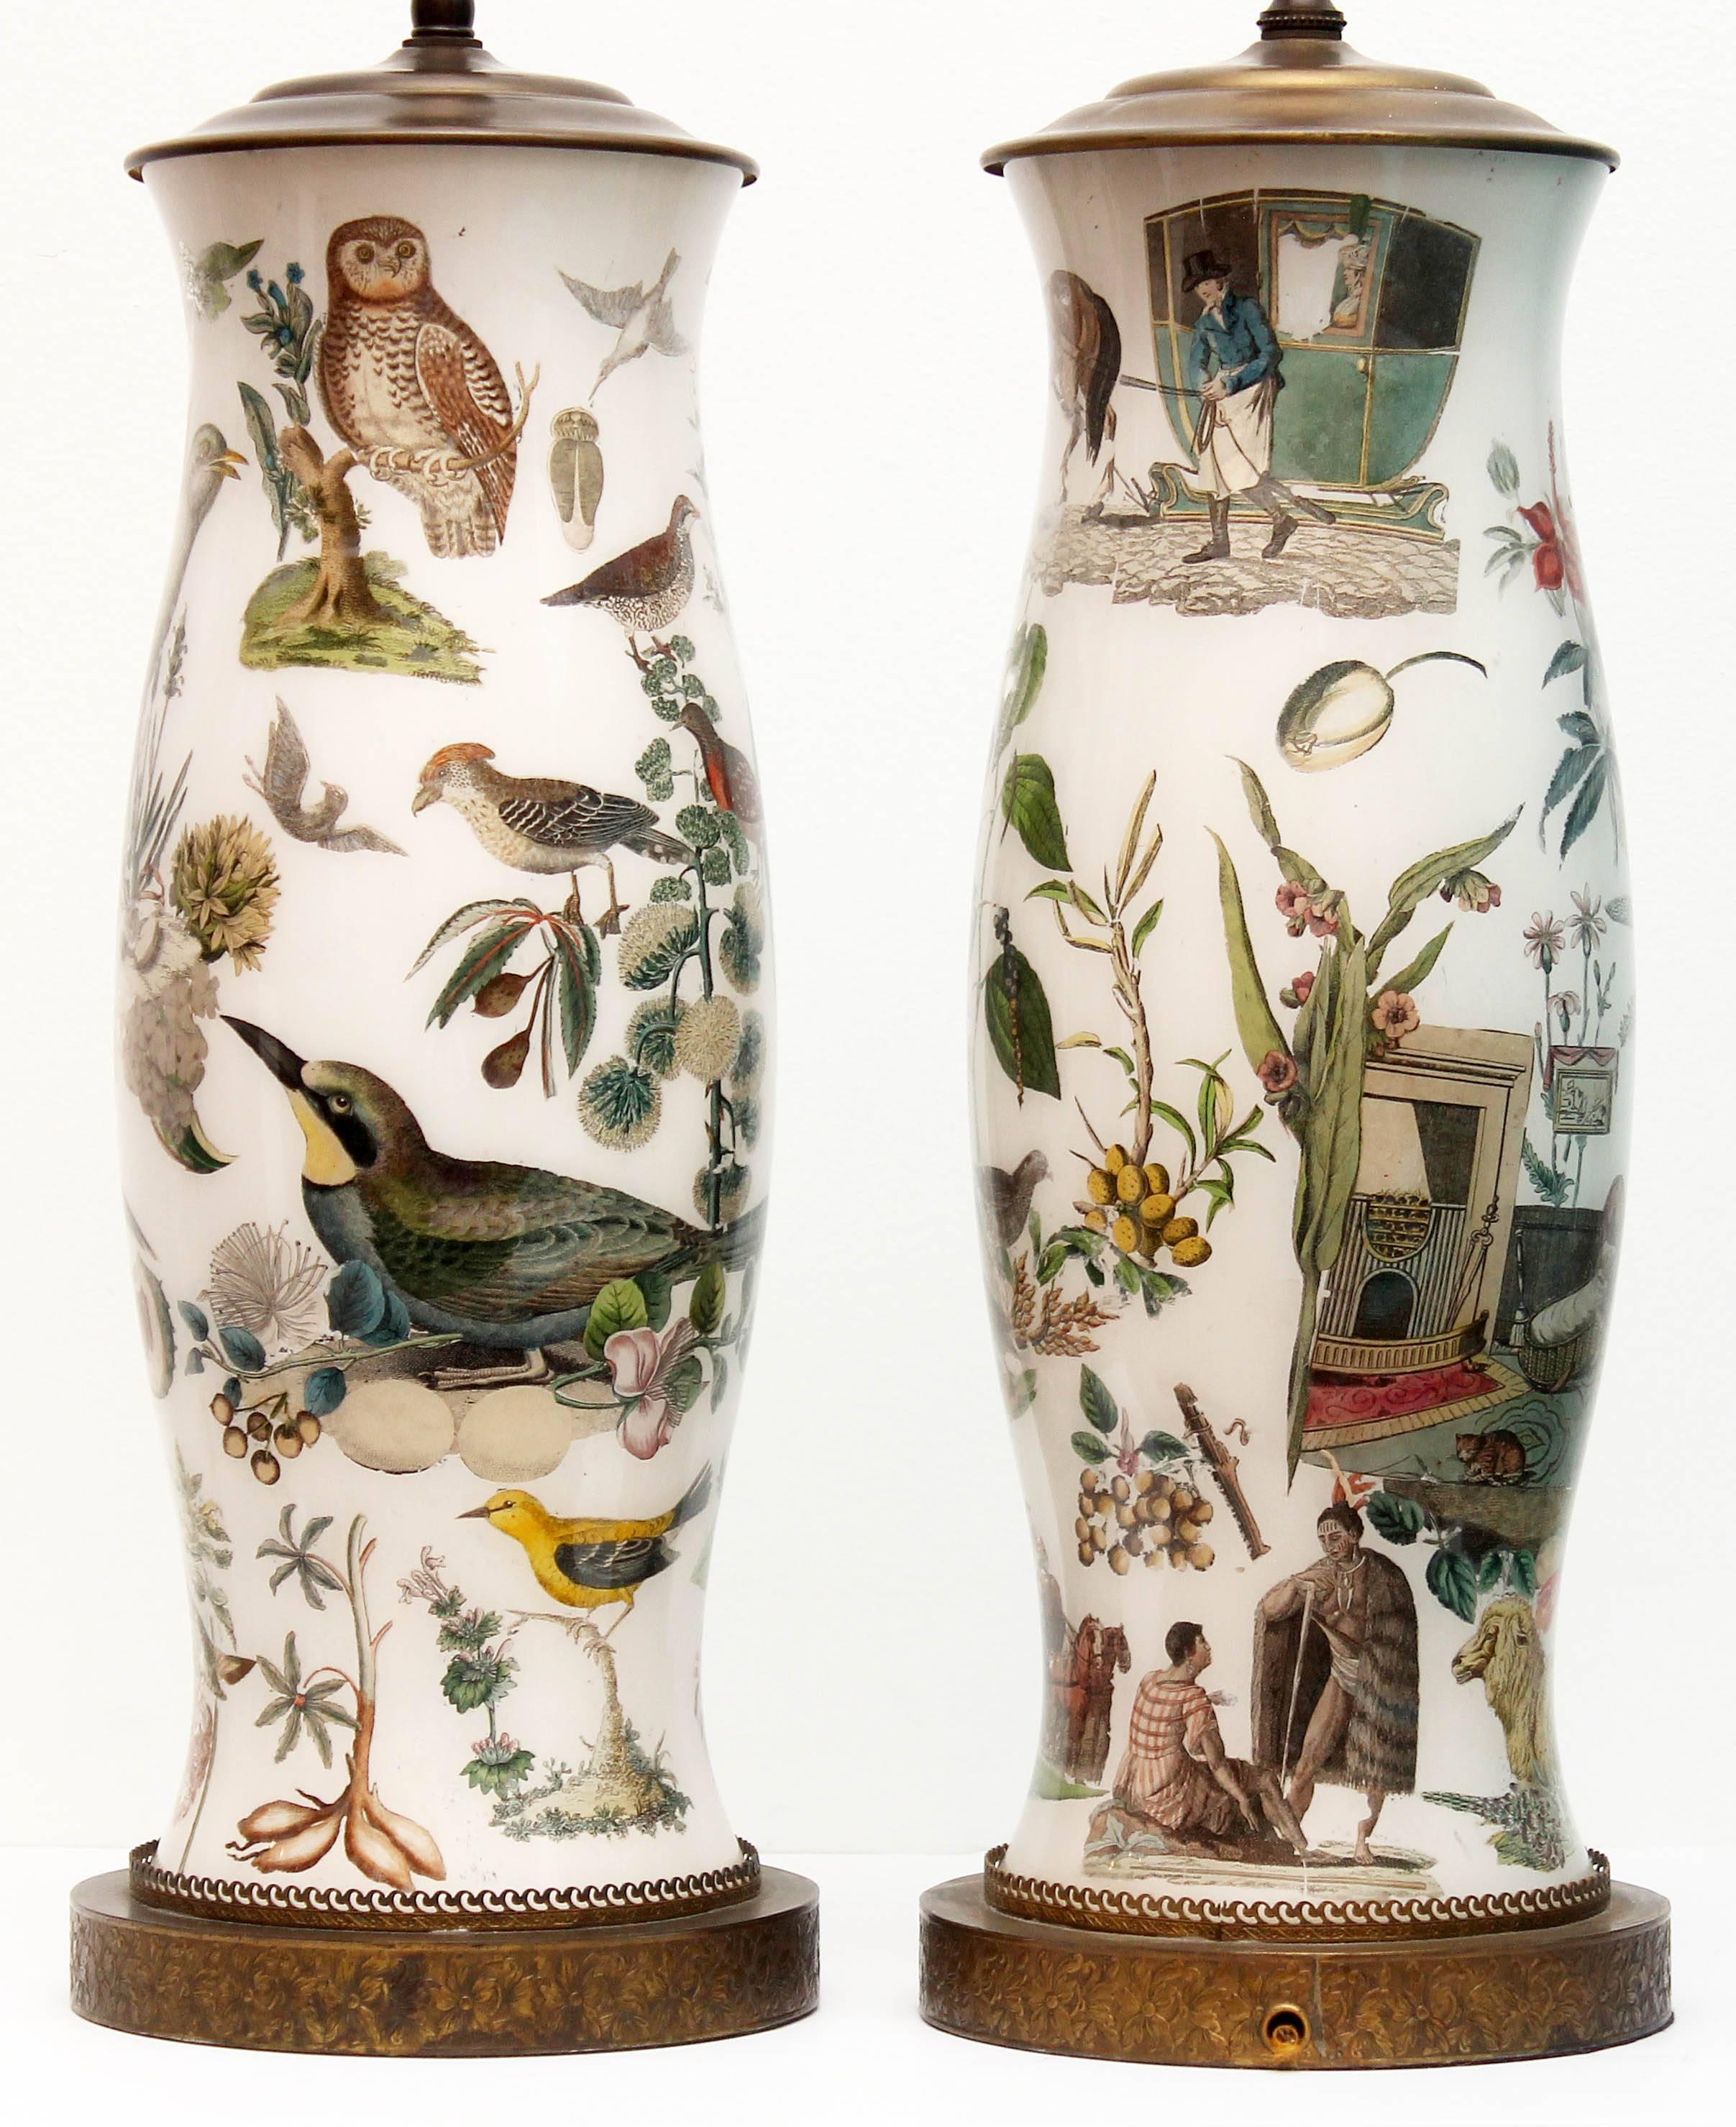 Pair of antique reverse decorated decalcomanie glass lamps. Bright and colorful, they are decorated with flora, fauna, and 19th century figures. Décalcomanie, is a decorative technique by which engravings and prints may be transferred. The bases are